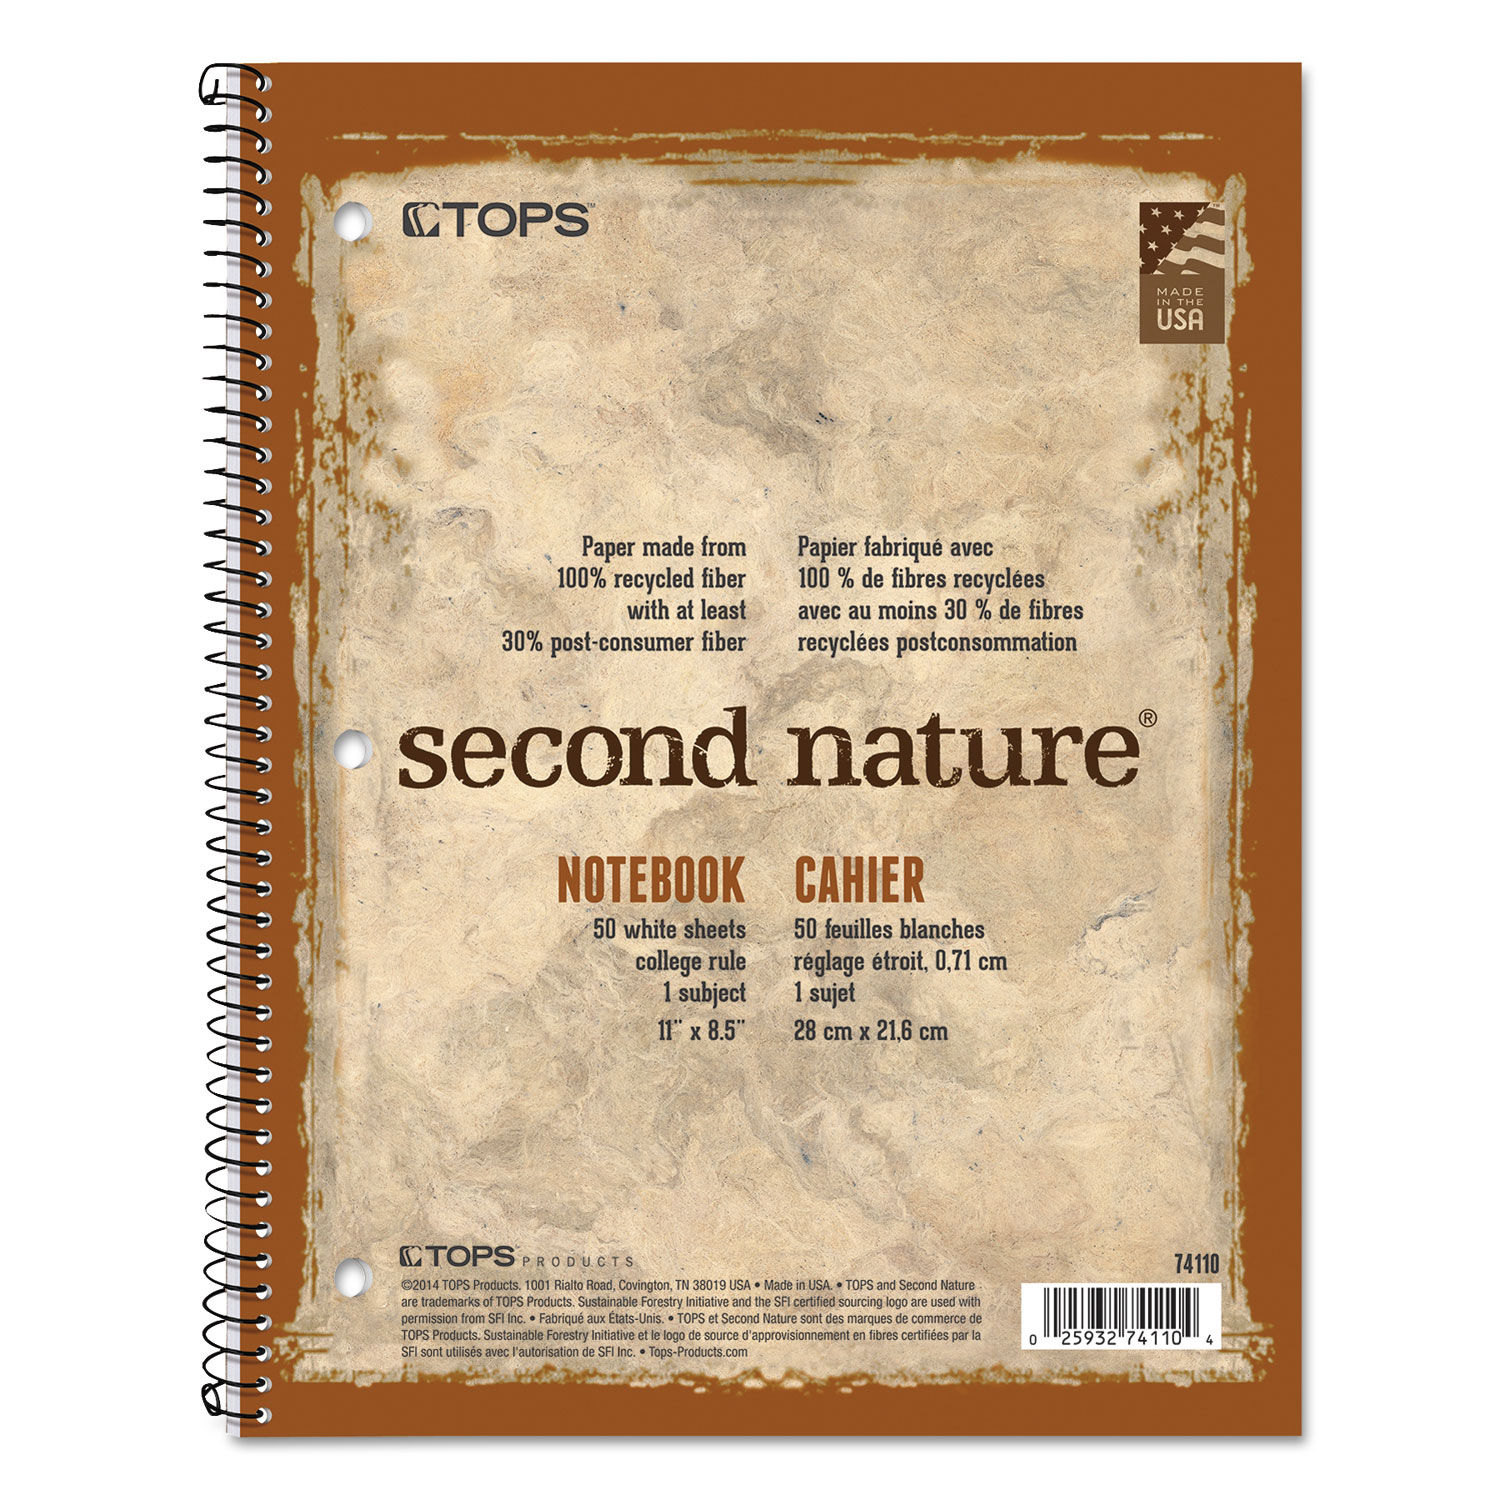 Second Nature Single Subject Wirebound Notebooks Medium/College Rule, Randomly Assorted Cover Color, (80) 11 x 8.5 Sheets